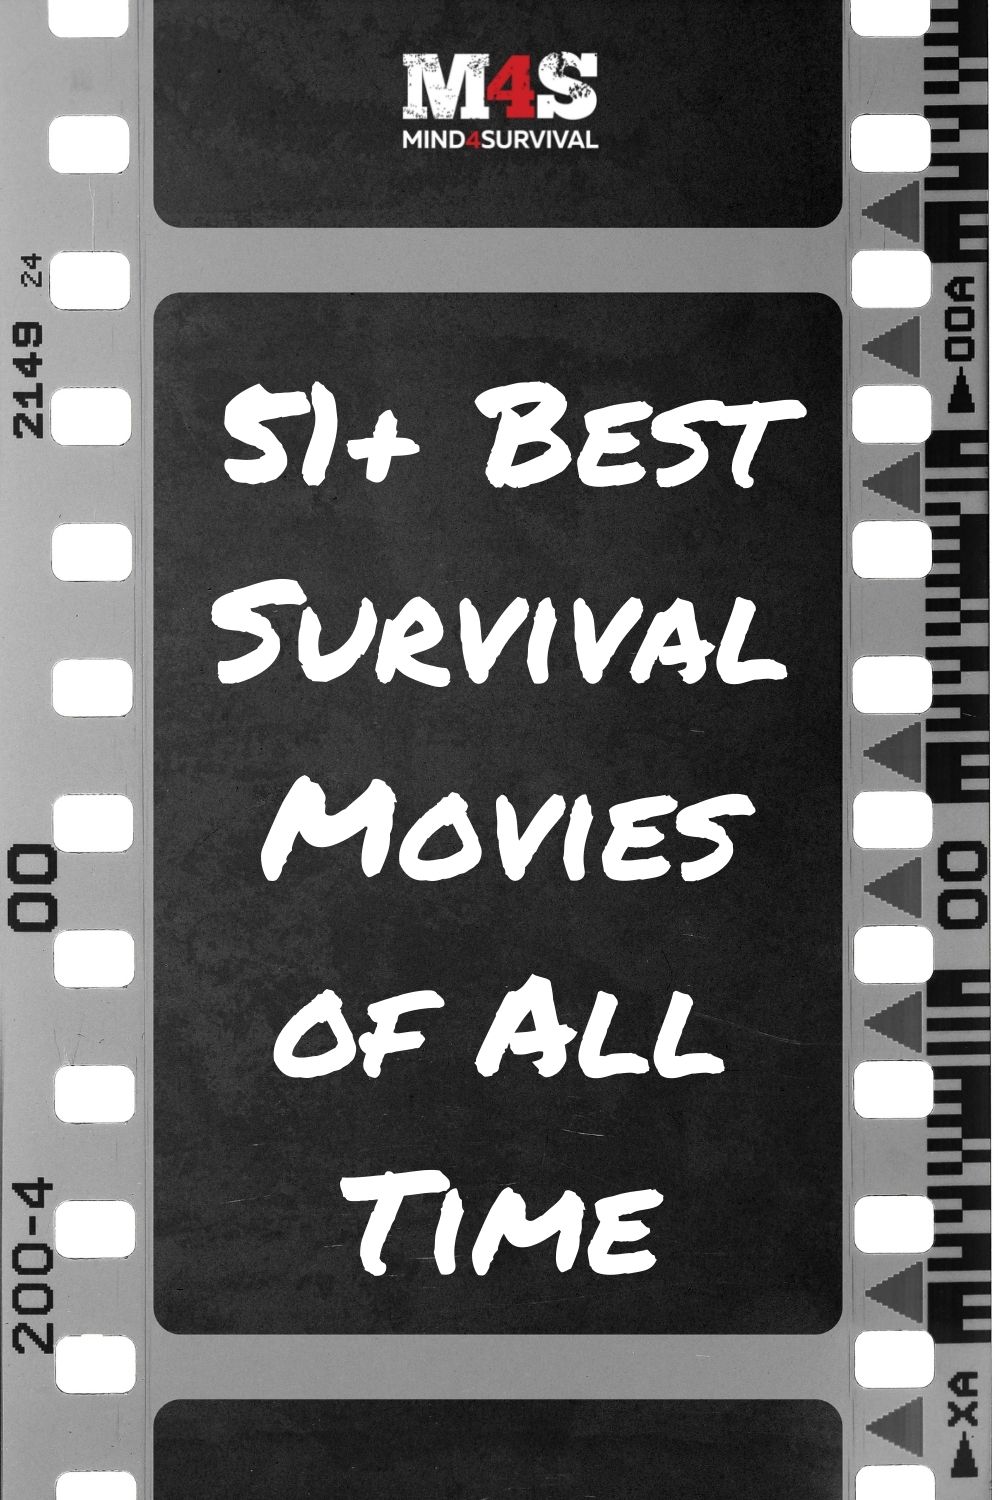 51+ Best Survival Movies of All Time - Watch Now! (2023)